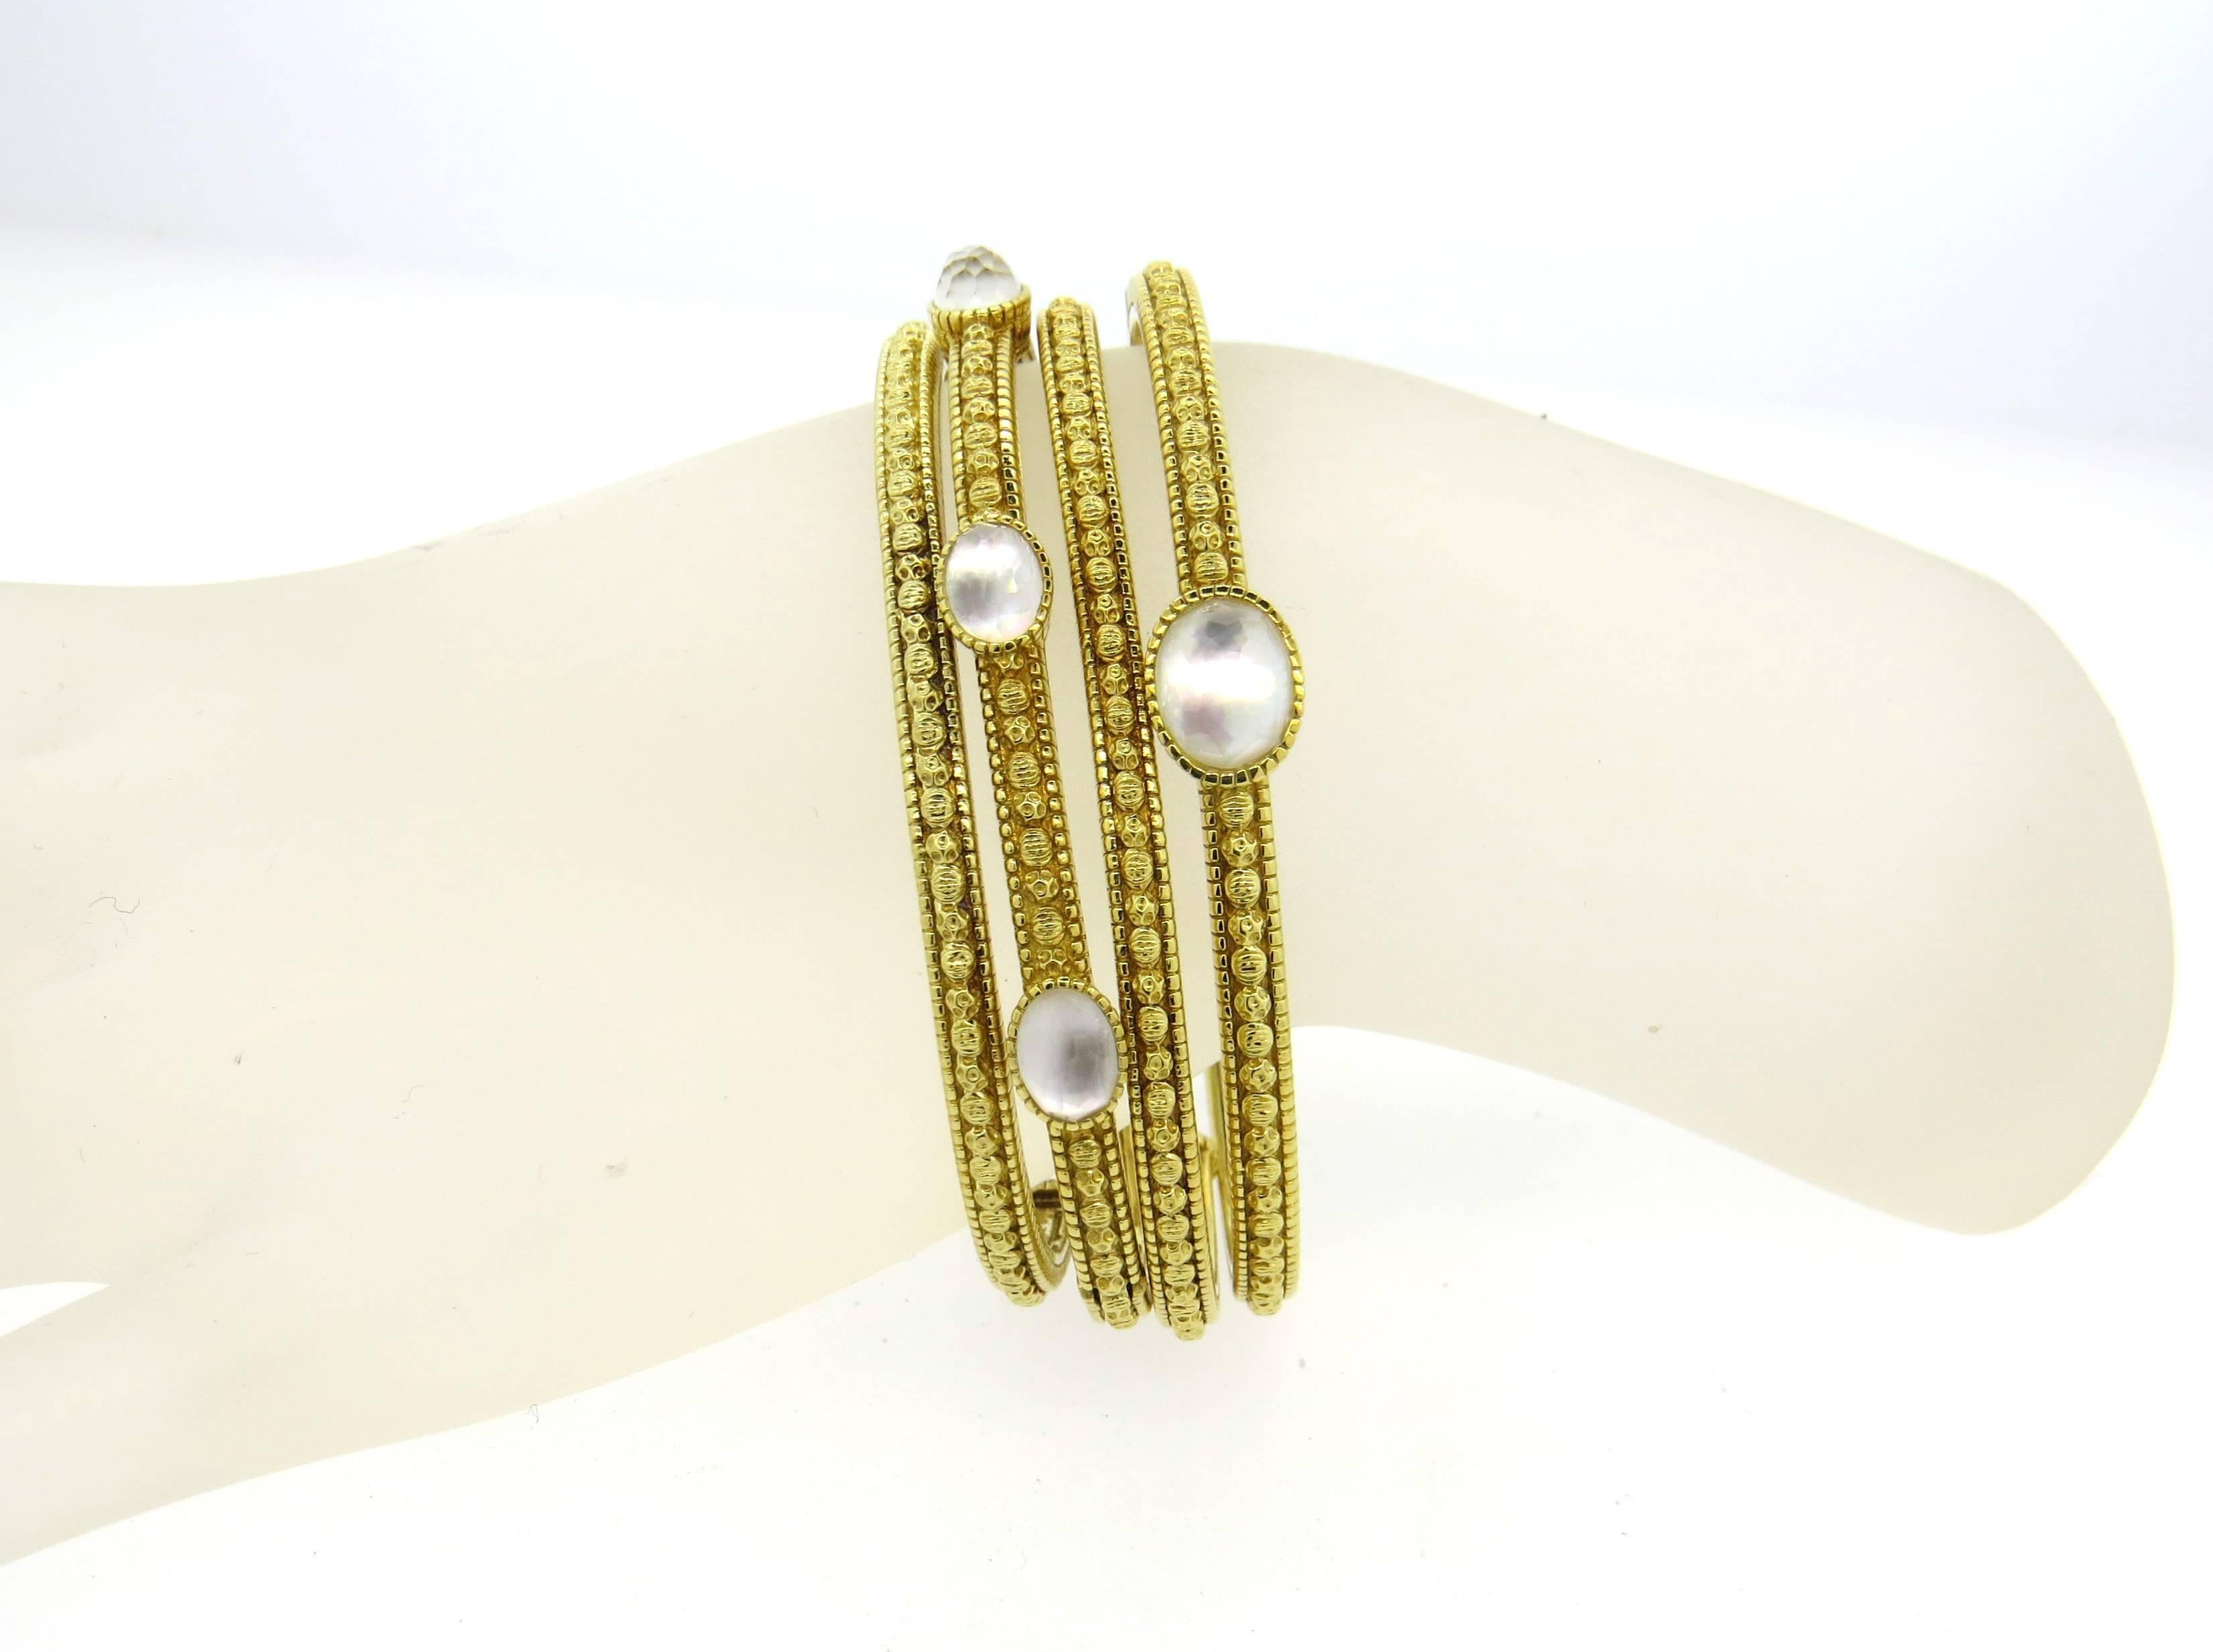 Set of four 18k yellow gold cuffs, crafted by Judith Ripka, decorated with faceted crystal backed with mother of pearl. Bracelets will all fit up to 6 3/4